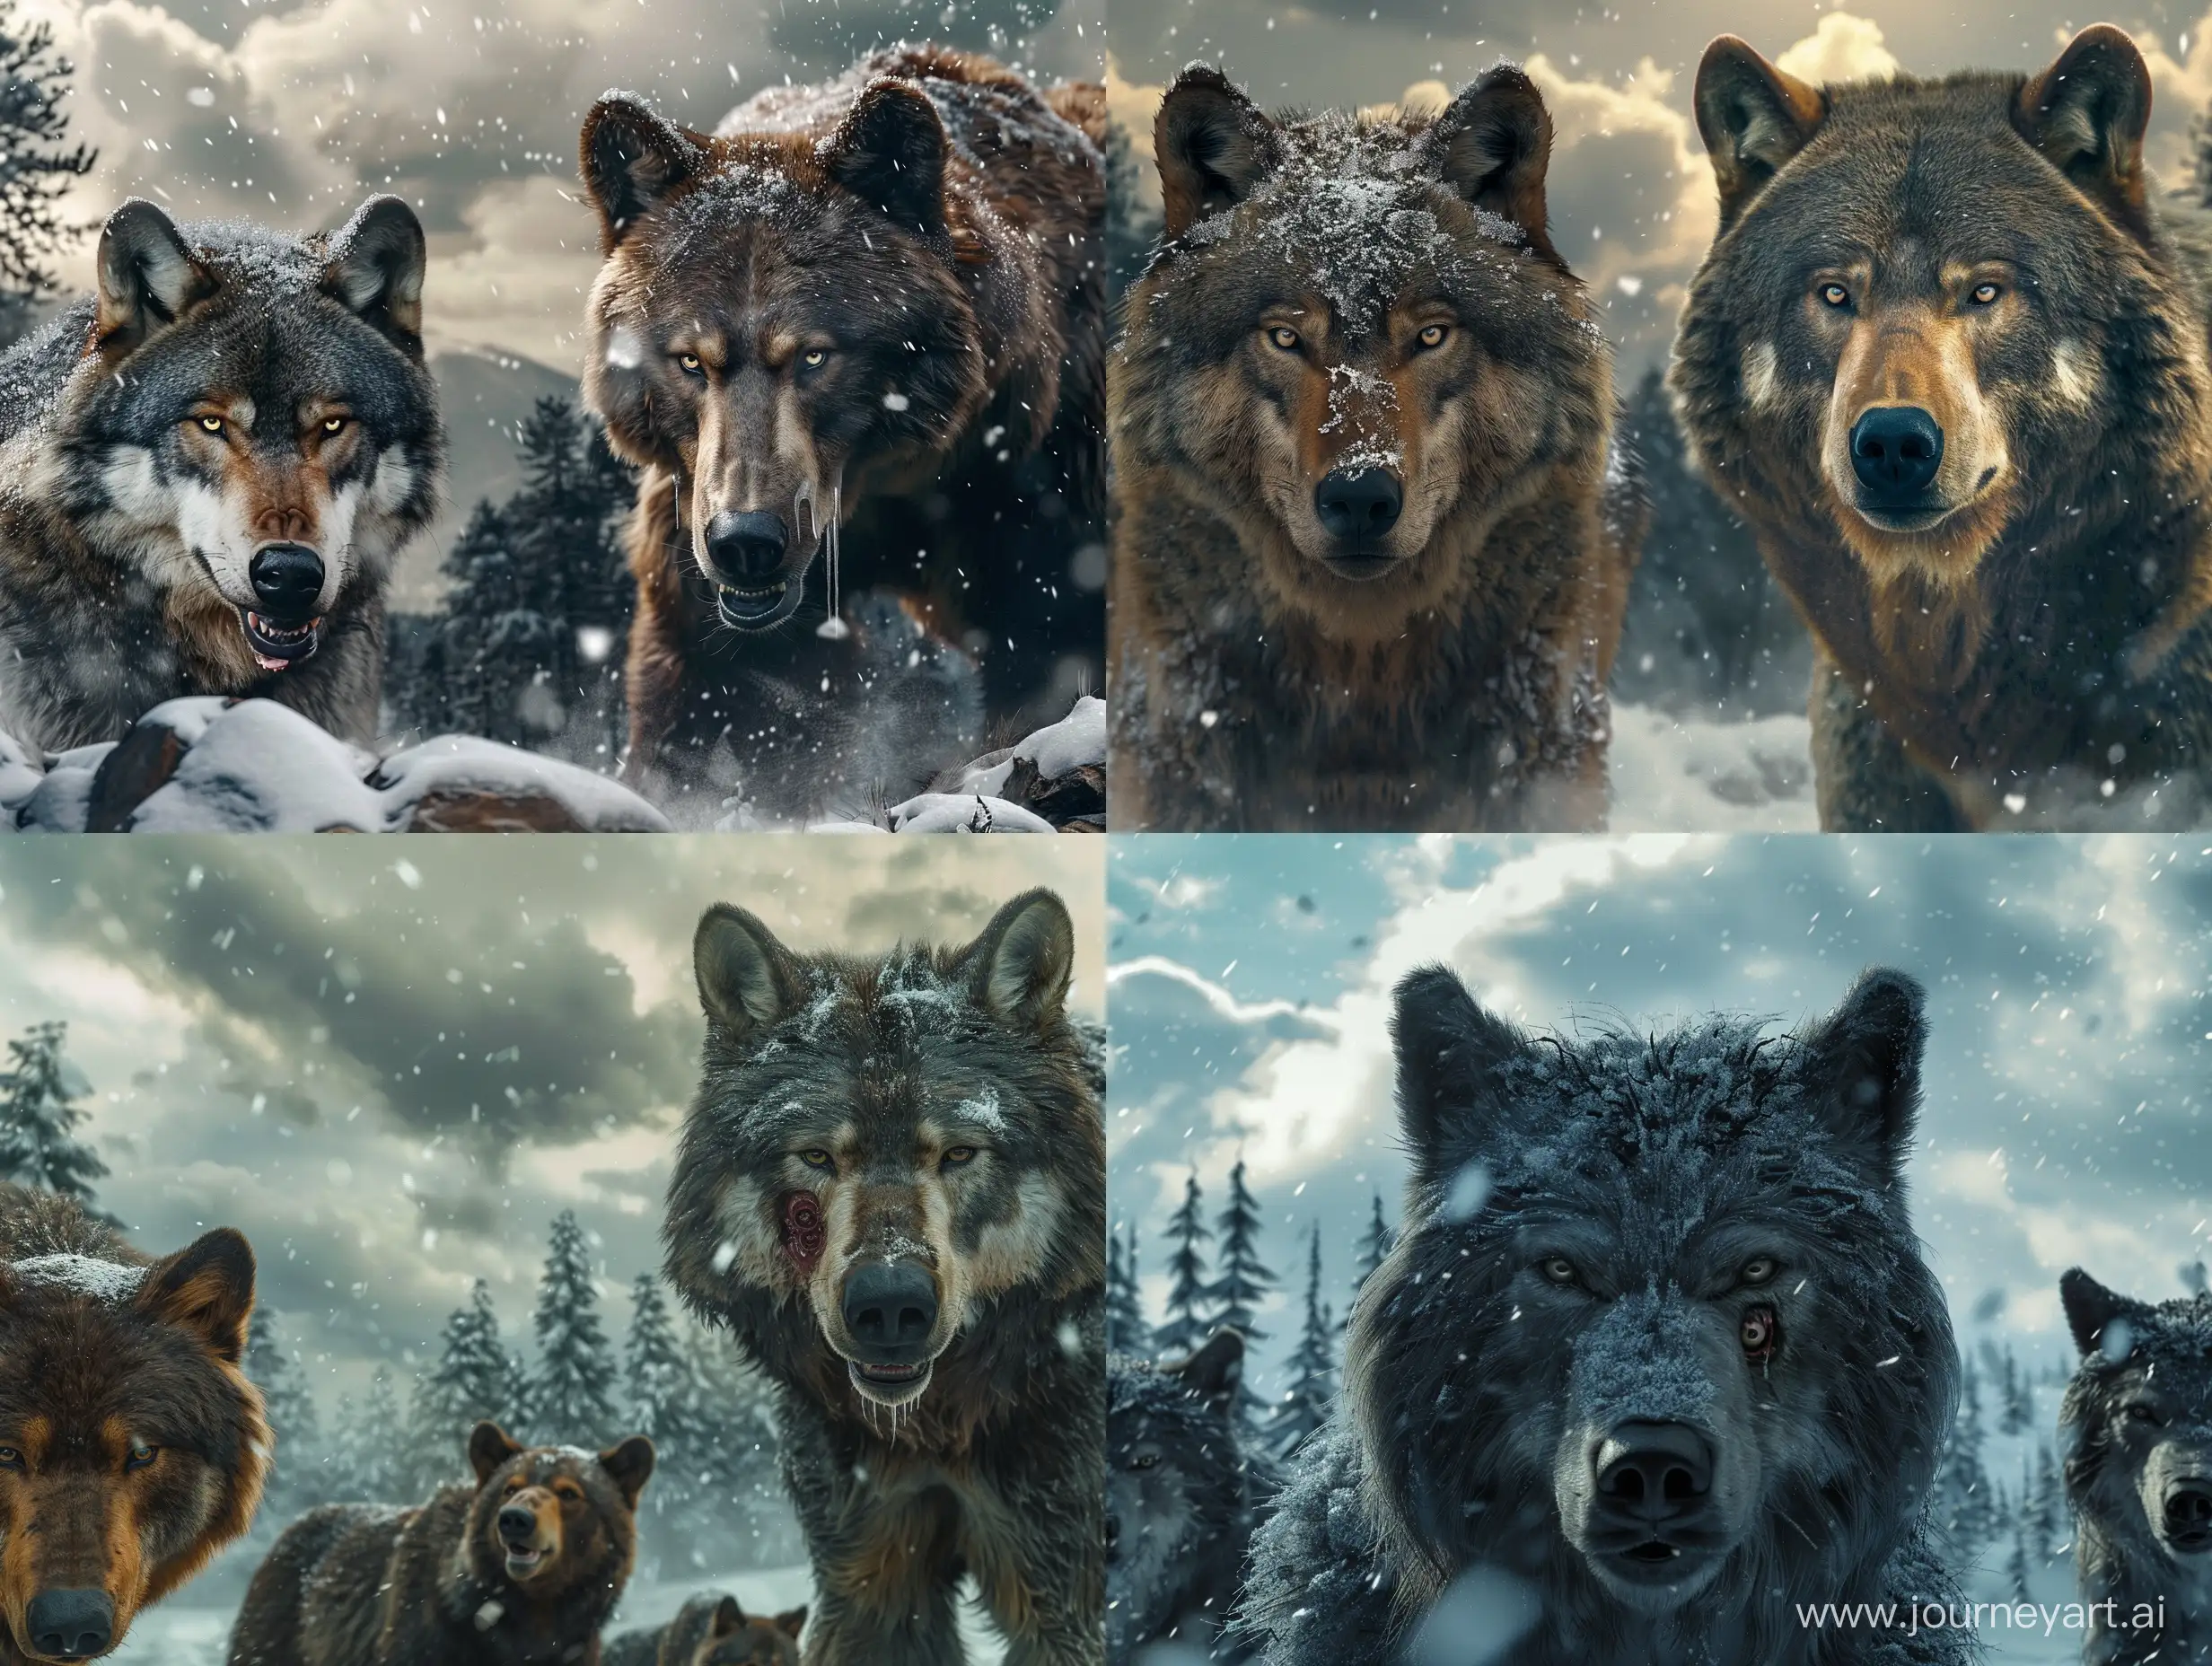 Menacing-Wolves-and-Bears-in-Snowy-Forest-UltraRealistic-Wildlife-Encounter